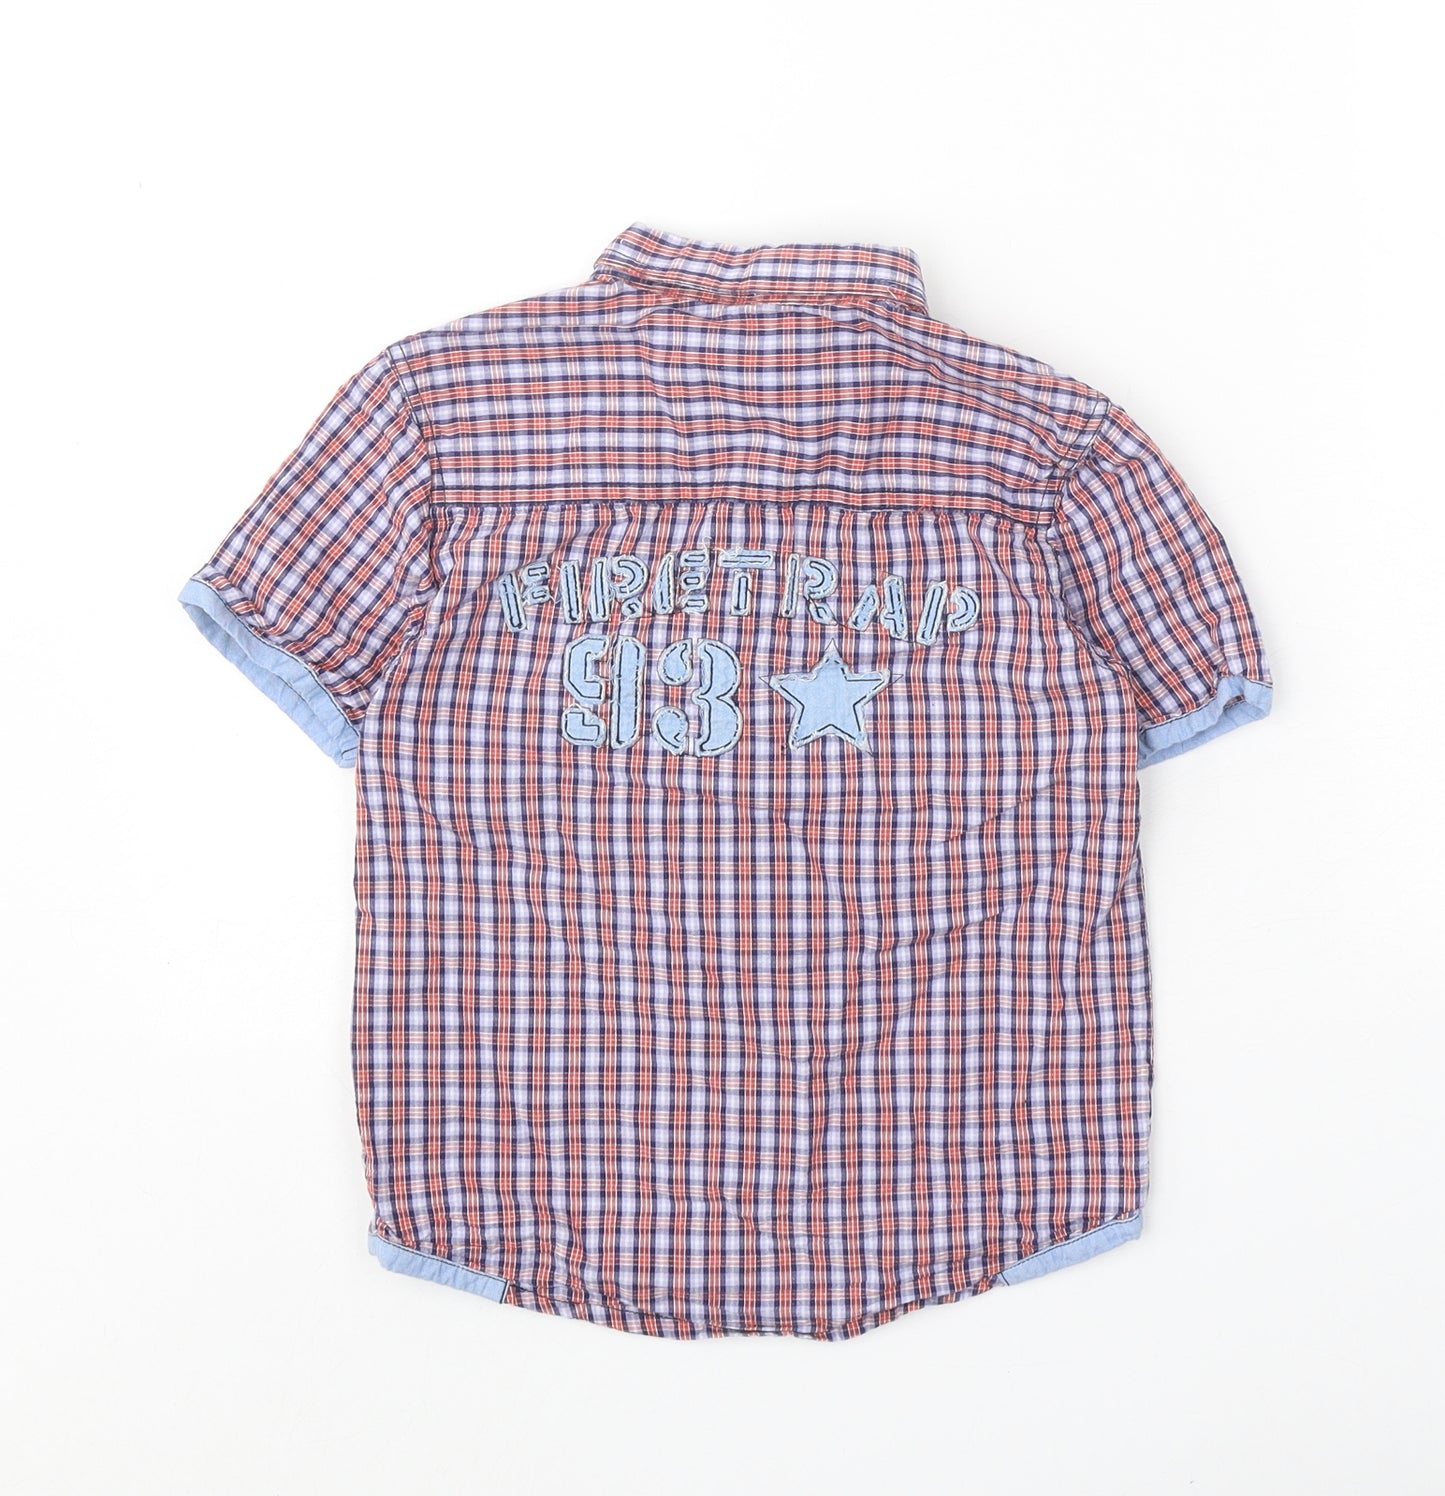 Firetrap Boys Blue Plaid 100% Cotton Basic Button-Up Size 6-7 Years Collared Button